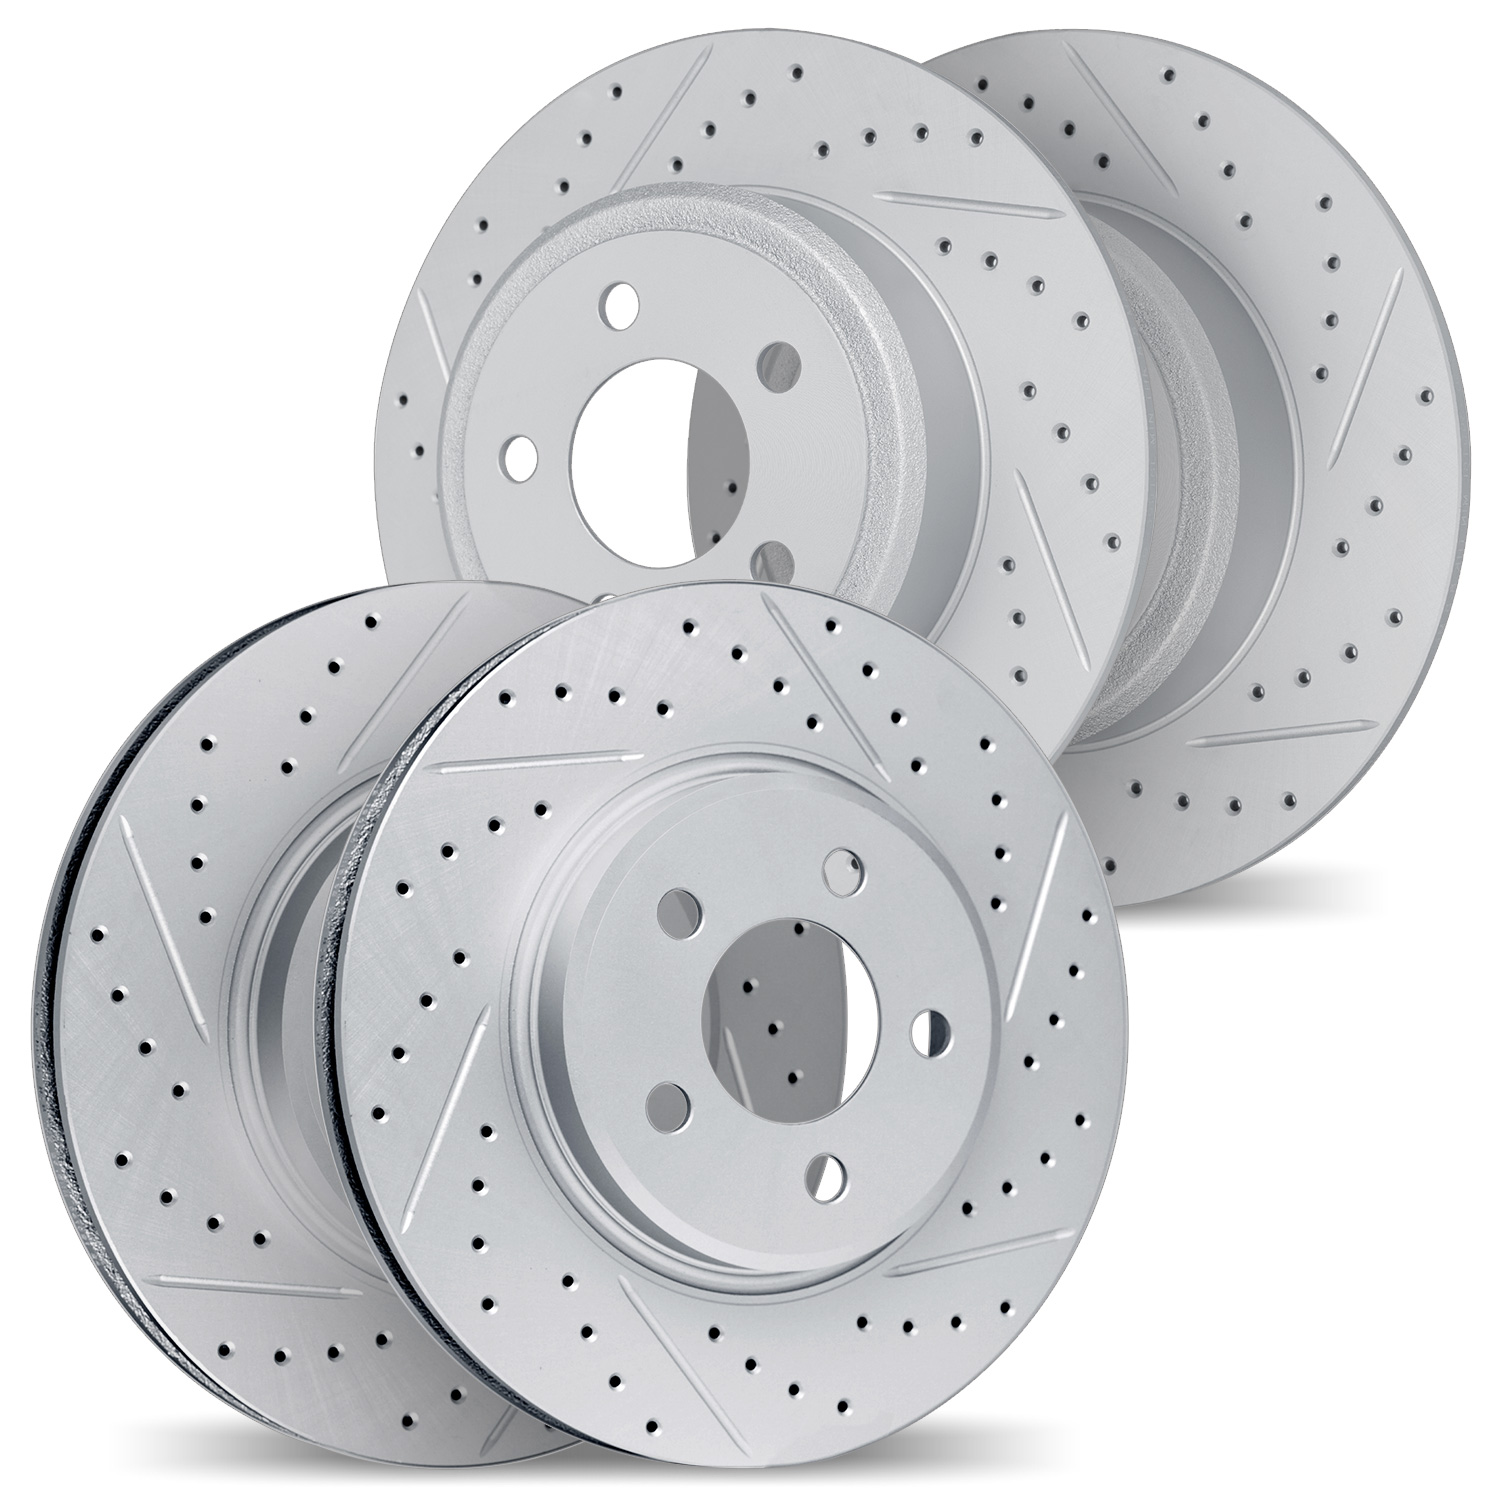 2004-75000 Geoperformance Drilled/Slotted Brake Rotors, 2011-2017 Lexus/Toyota/Scion, Position: Front and Rear